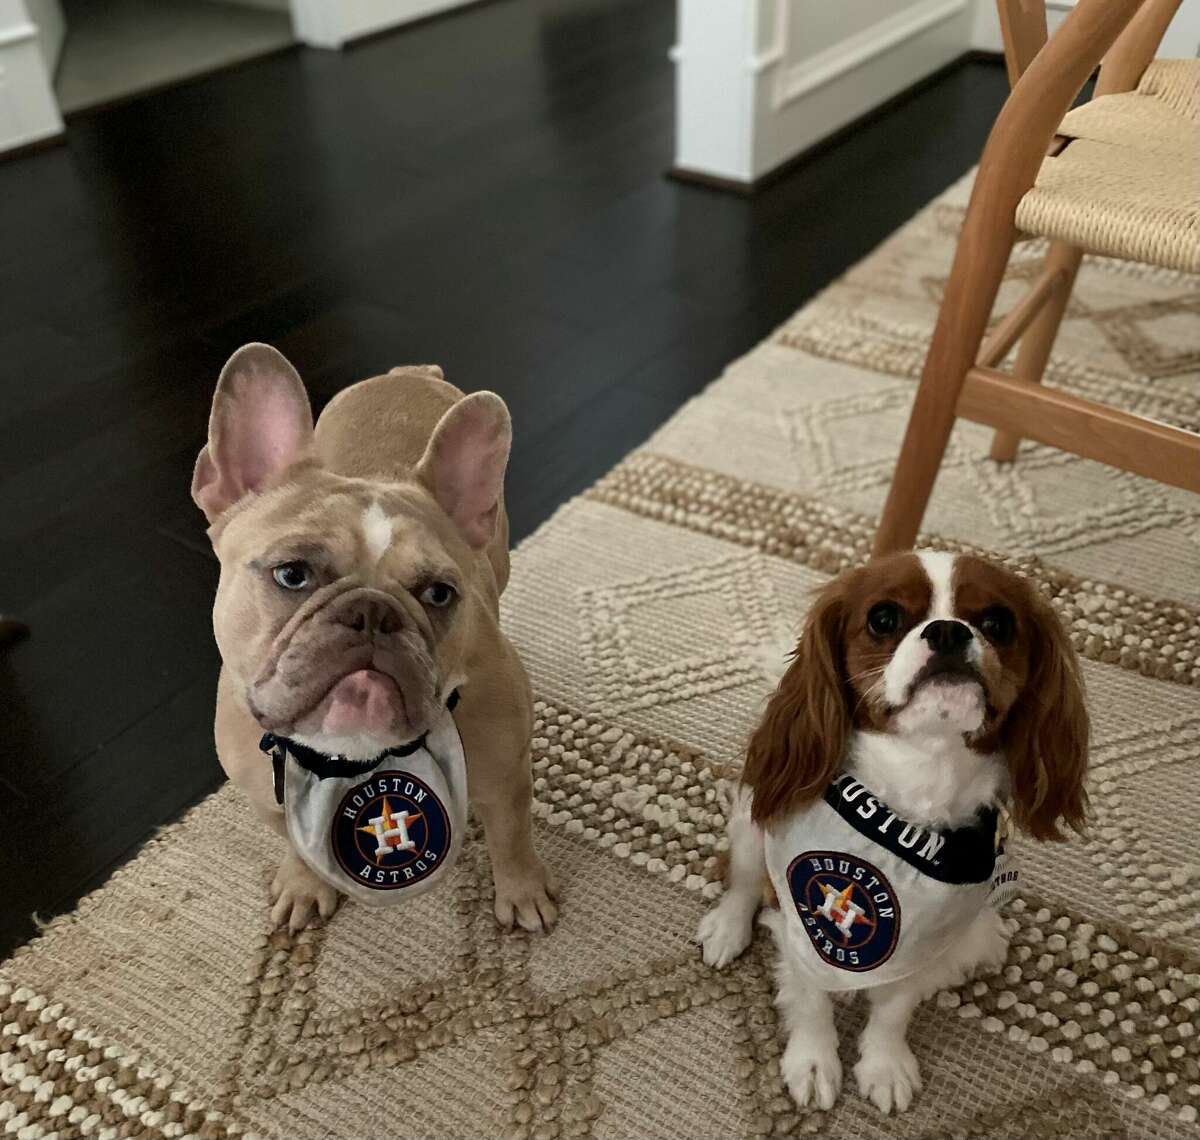 Luca and Cash Alvarez are game day ready with Astros gear.